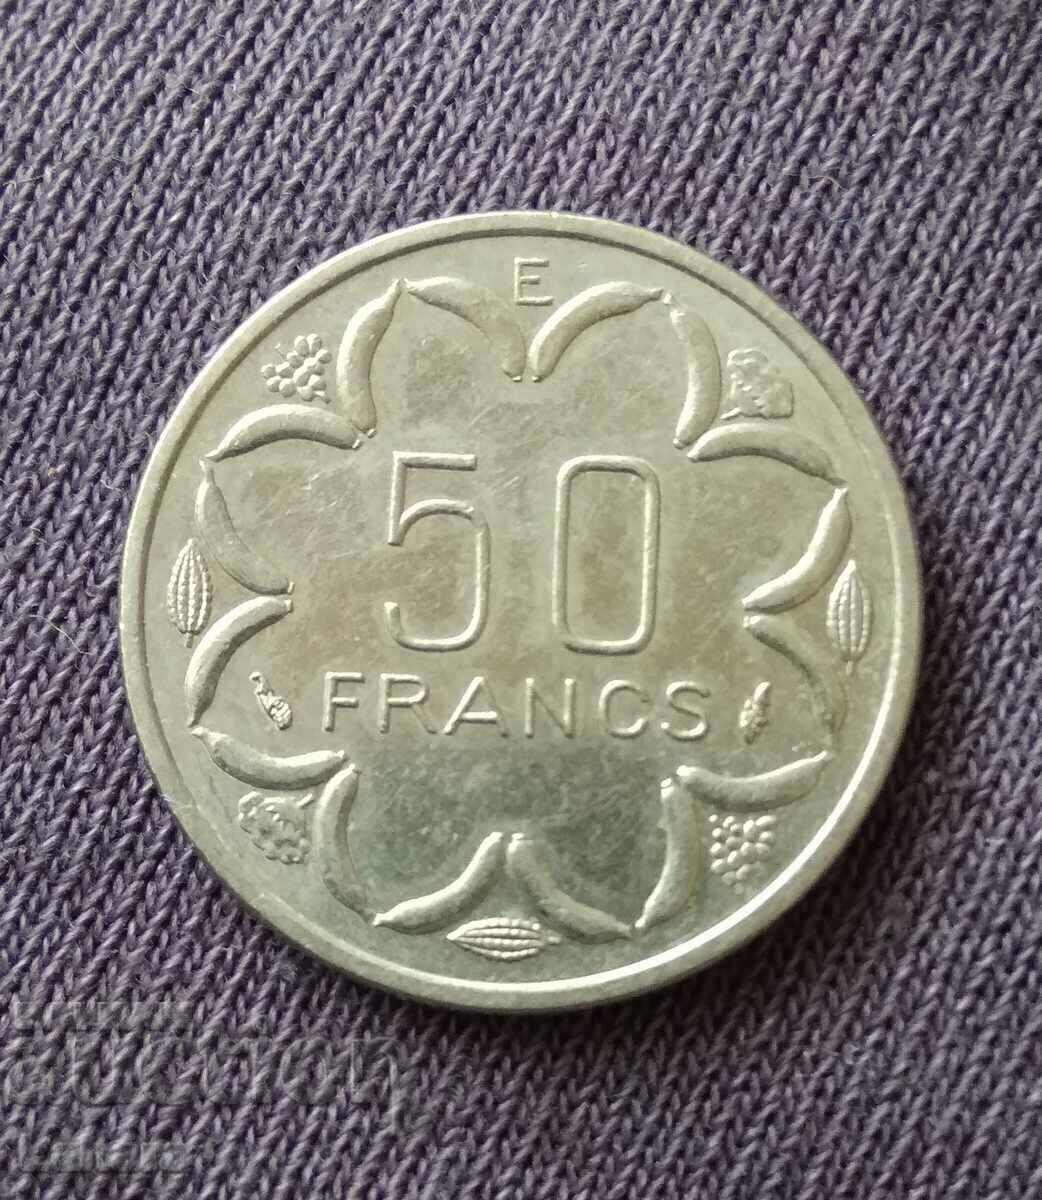 50 francs 1979 Central African States, Cameroon